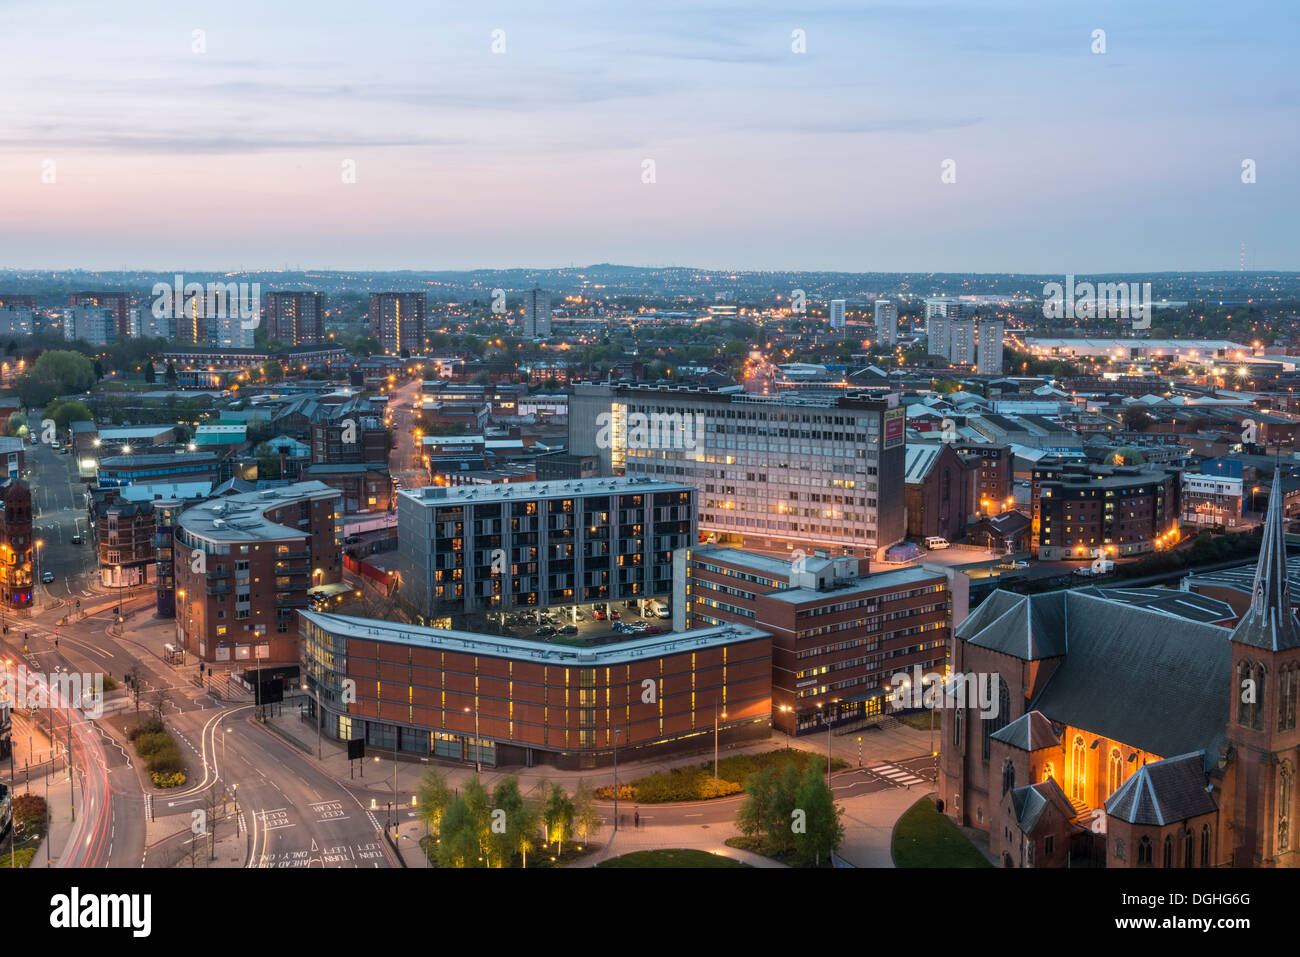 St Chads Cathedral and the Gun Quarter of Birmingham, England Stock Photo